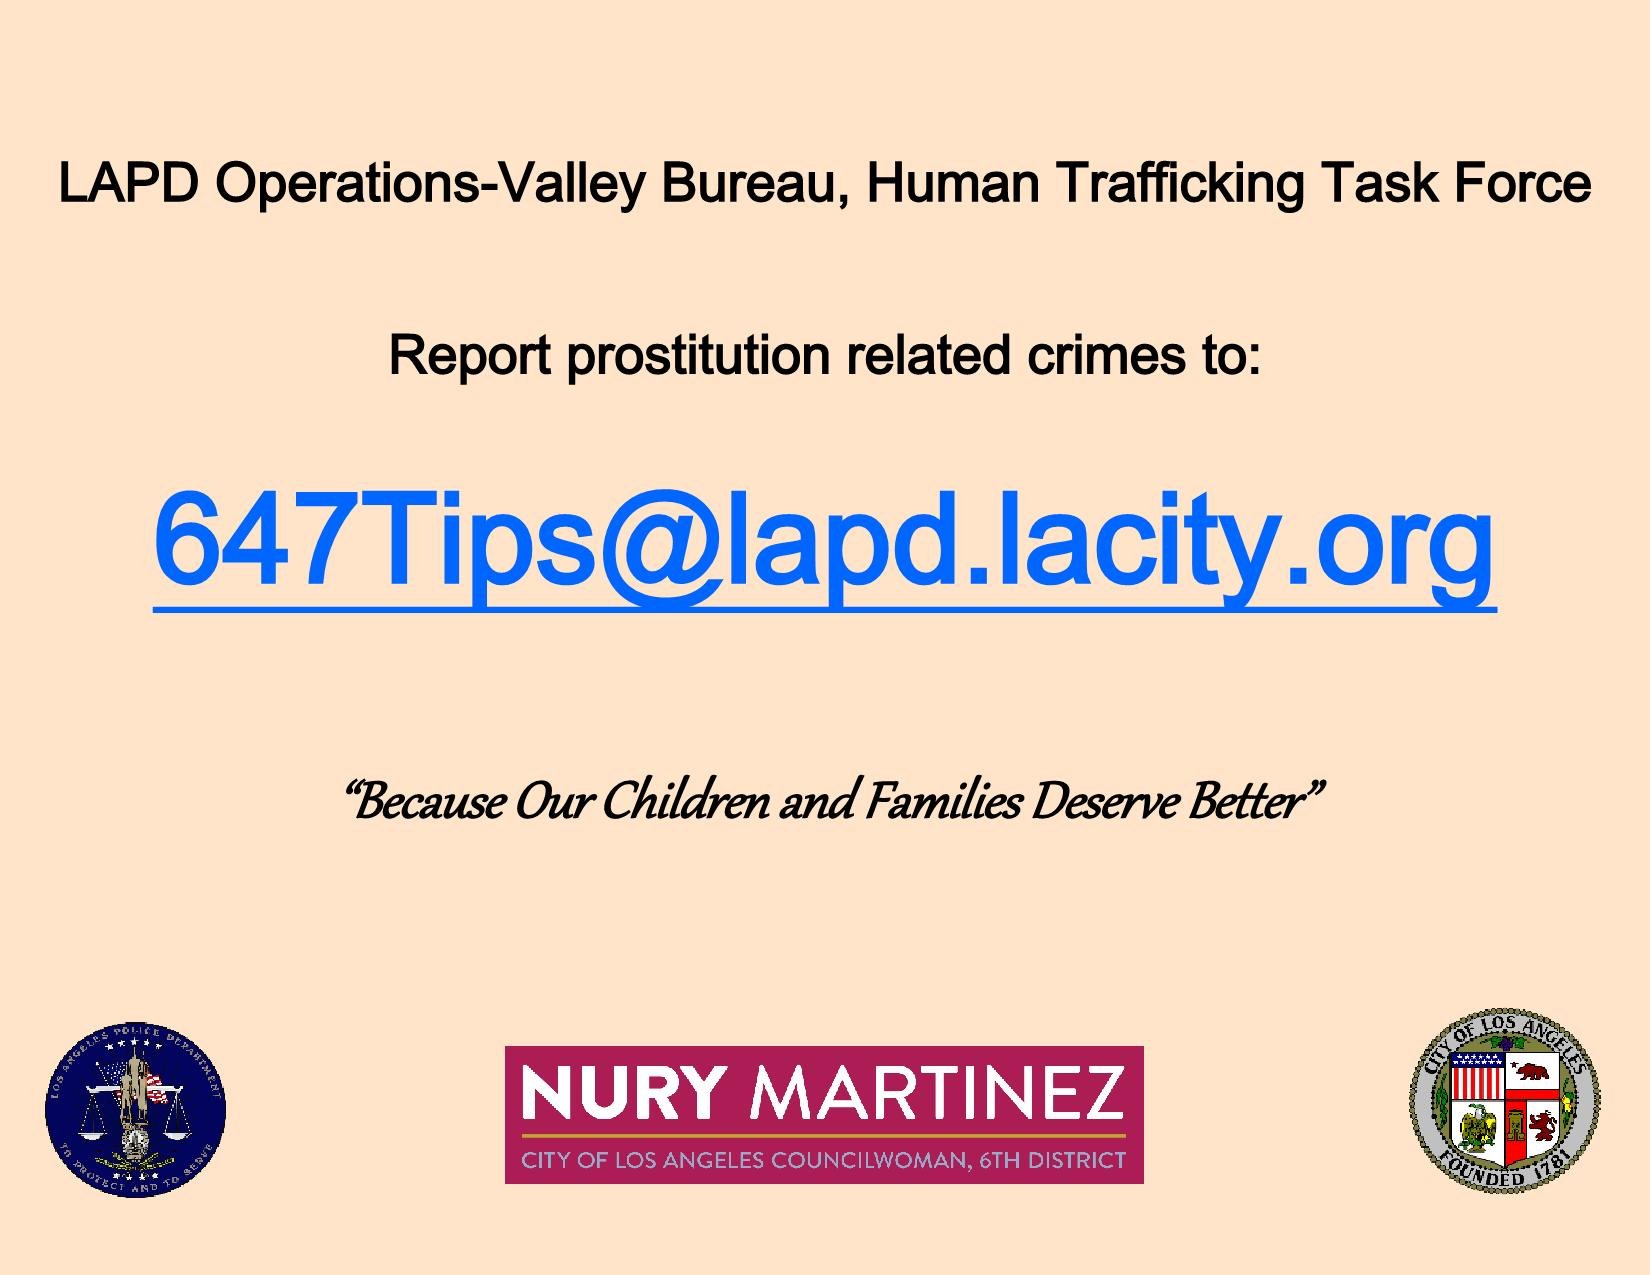 LAPD Human Trafficking Task Force Board 11-19-2015_page_1